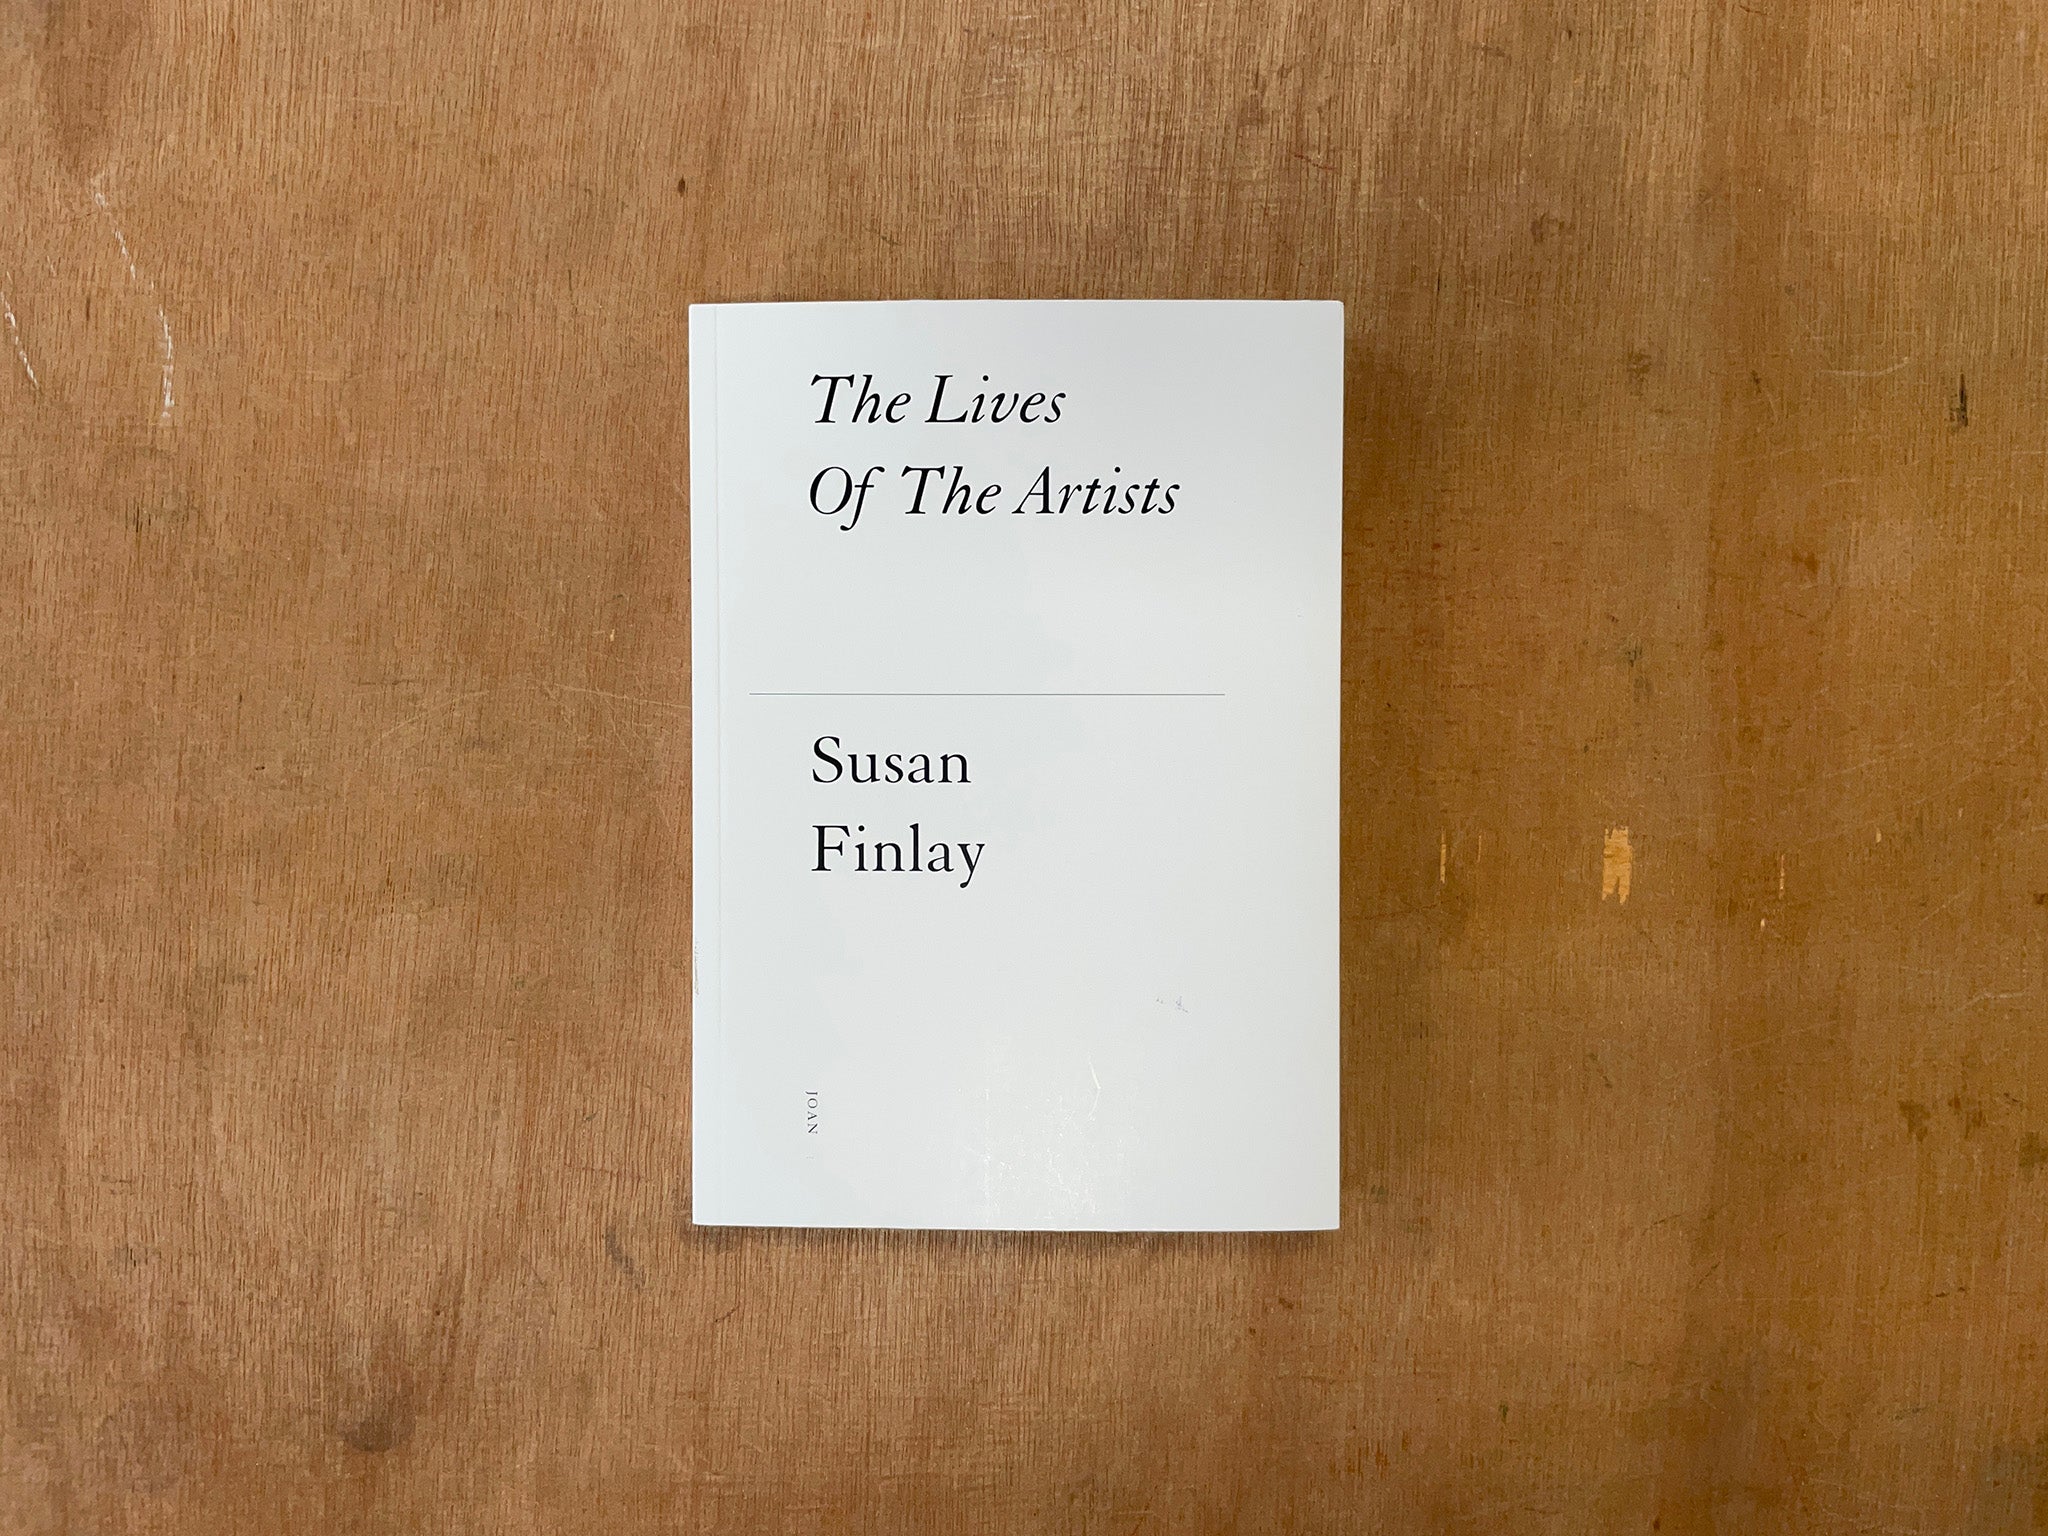 THE LIVES OF ARTISTS by Susan Finlay